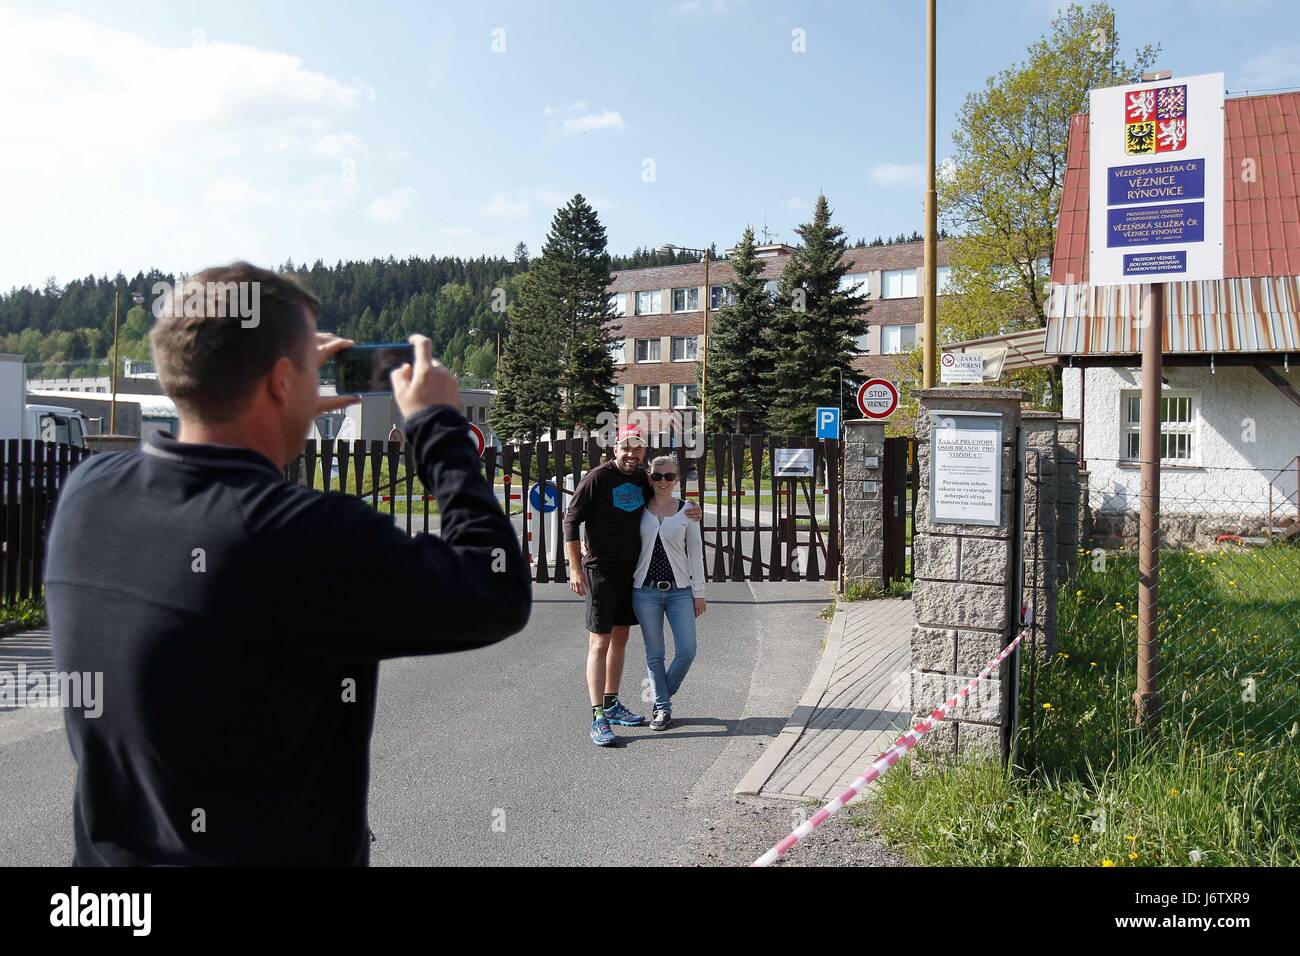 People take picture in front of the Rynovice prison in Jablonec nad Nisou, Czech Republic, May 21, 2017. Czech President Milos Zeman will grant pardon to Jiri Kajinek, who is serving life sentence for contract killing. Kajinek, 56, is probably the best-known Czech prisoner. He gained popularity mainly by his spectacular escape from Mirov, the country's toughest-security prison in north Moravia, in 2000. The police caught him after about six weeks on the run. A court in Plzen, west Bohemia, sentenced Kajinek to life on June 23, 1998. He was convicted of shooting businessman Stefan Janda and his Stock Photo